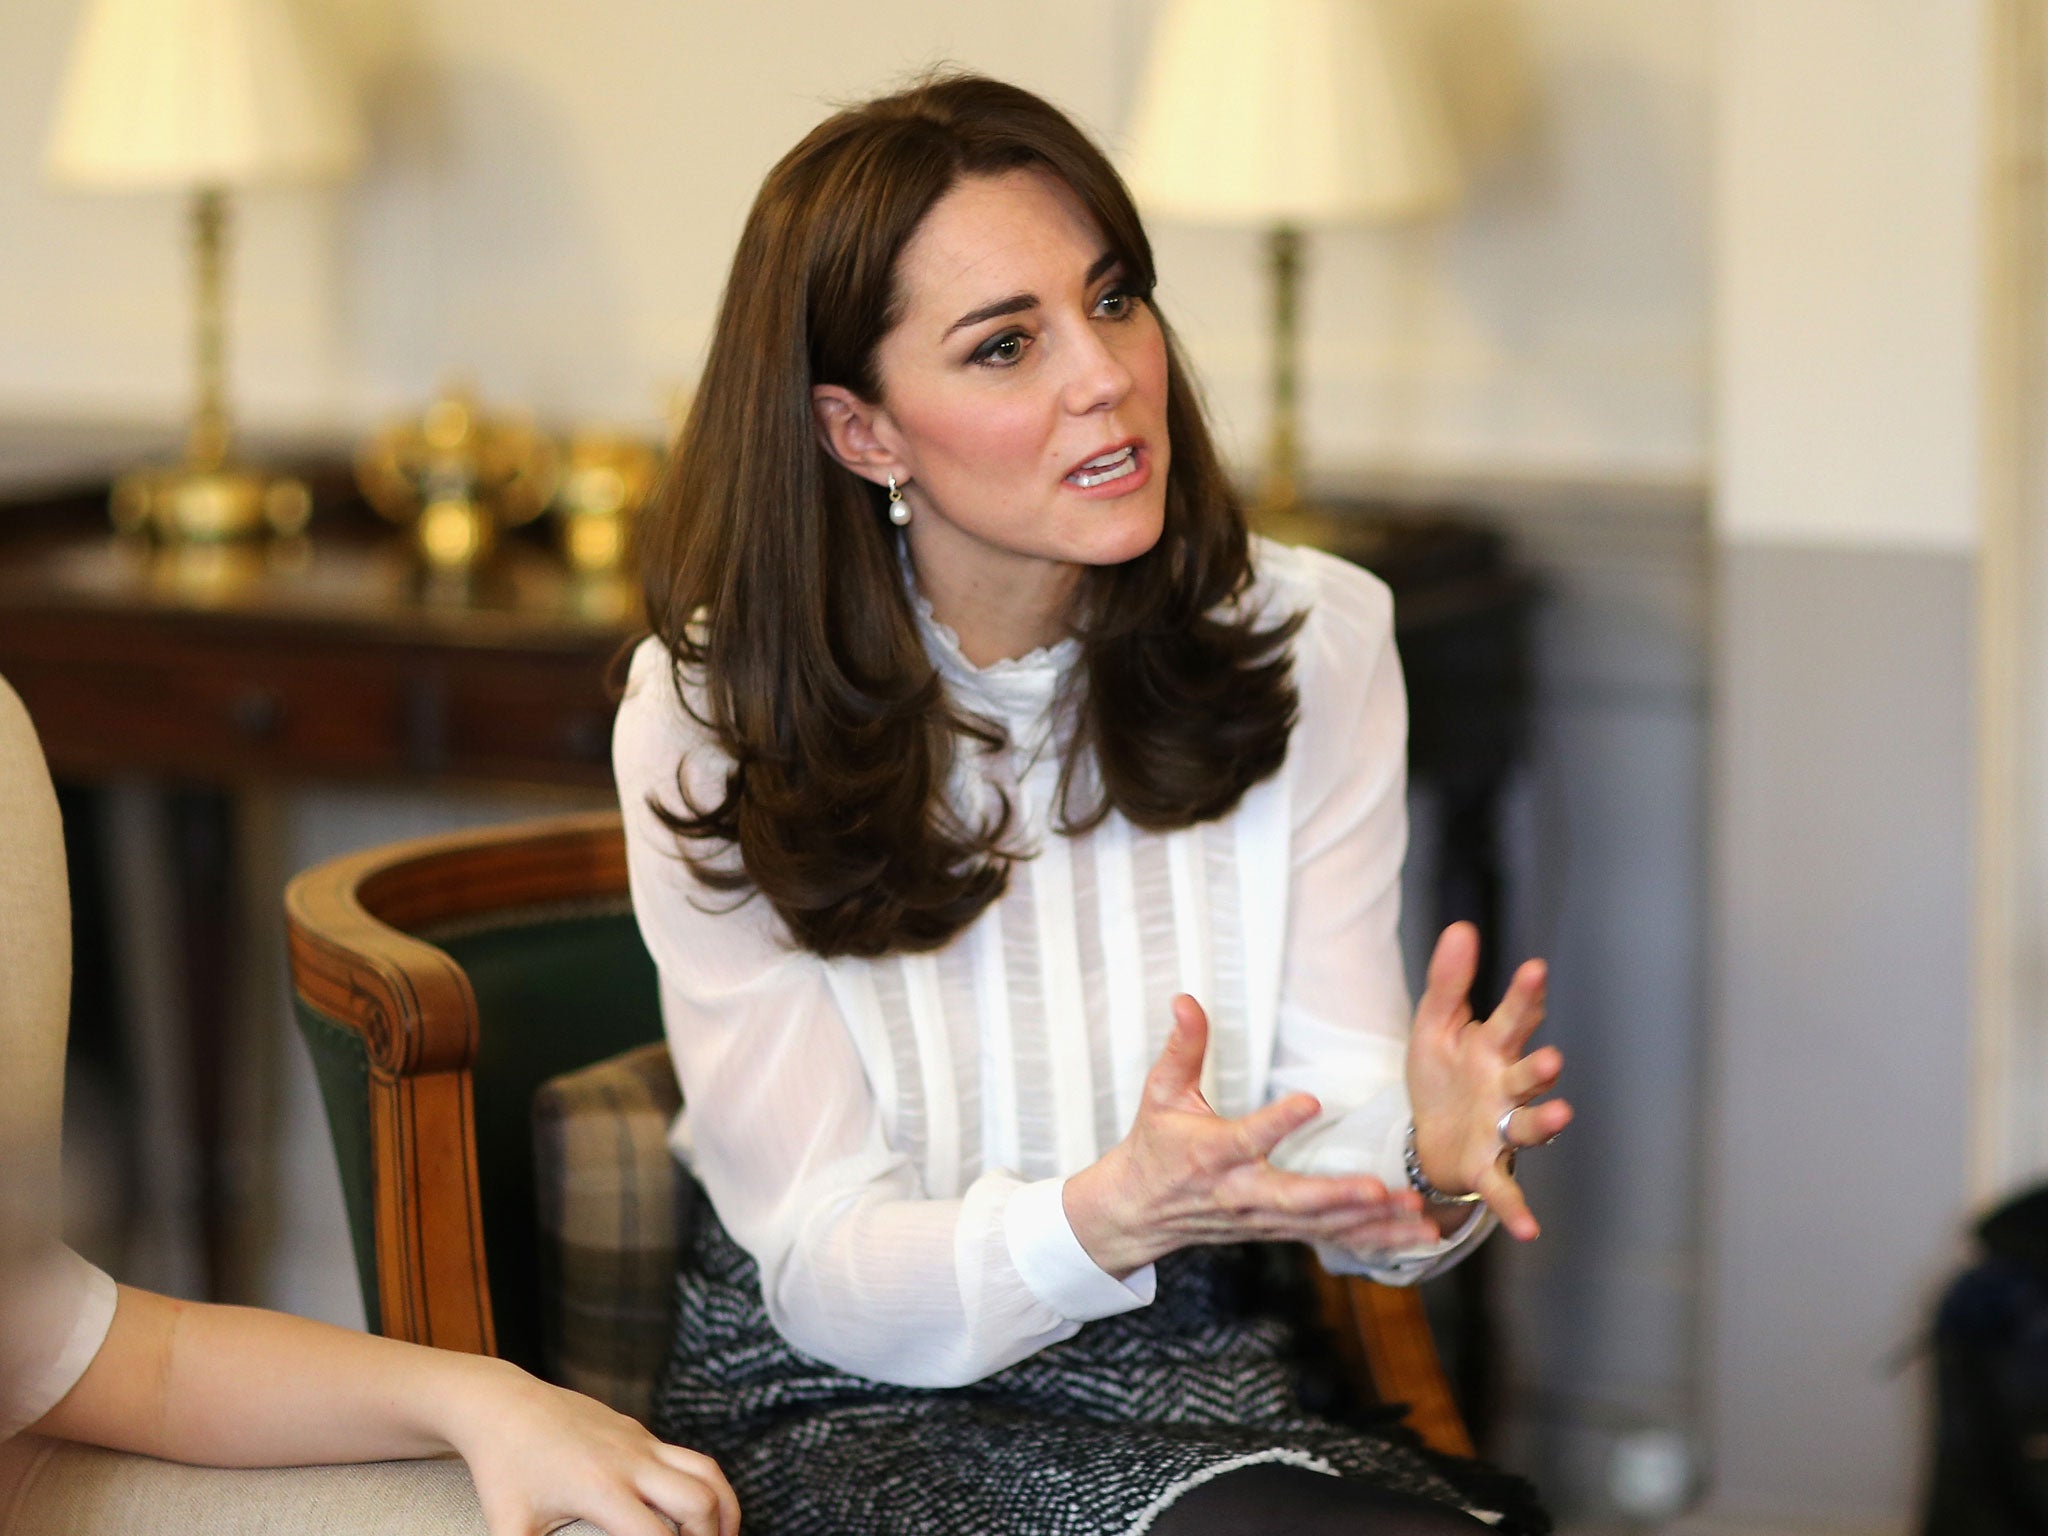 The Duchess of Cambridge has made young people's mental health one of her major interests (Getty)